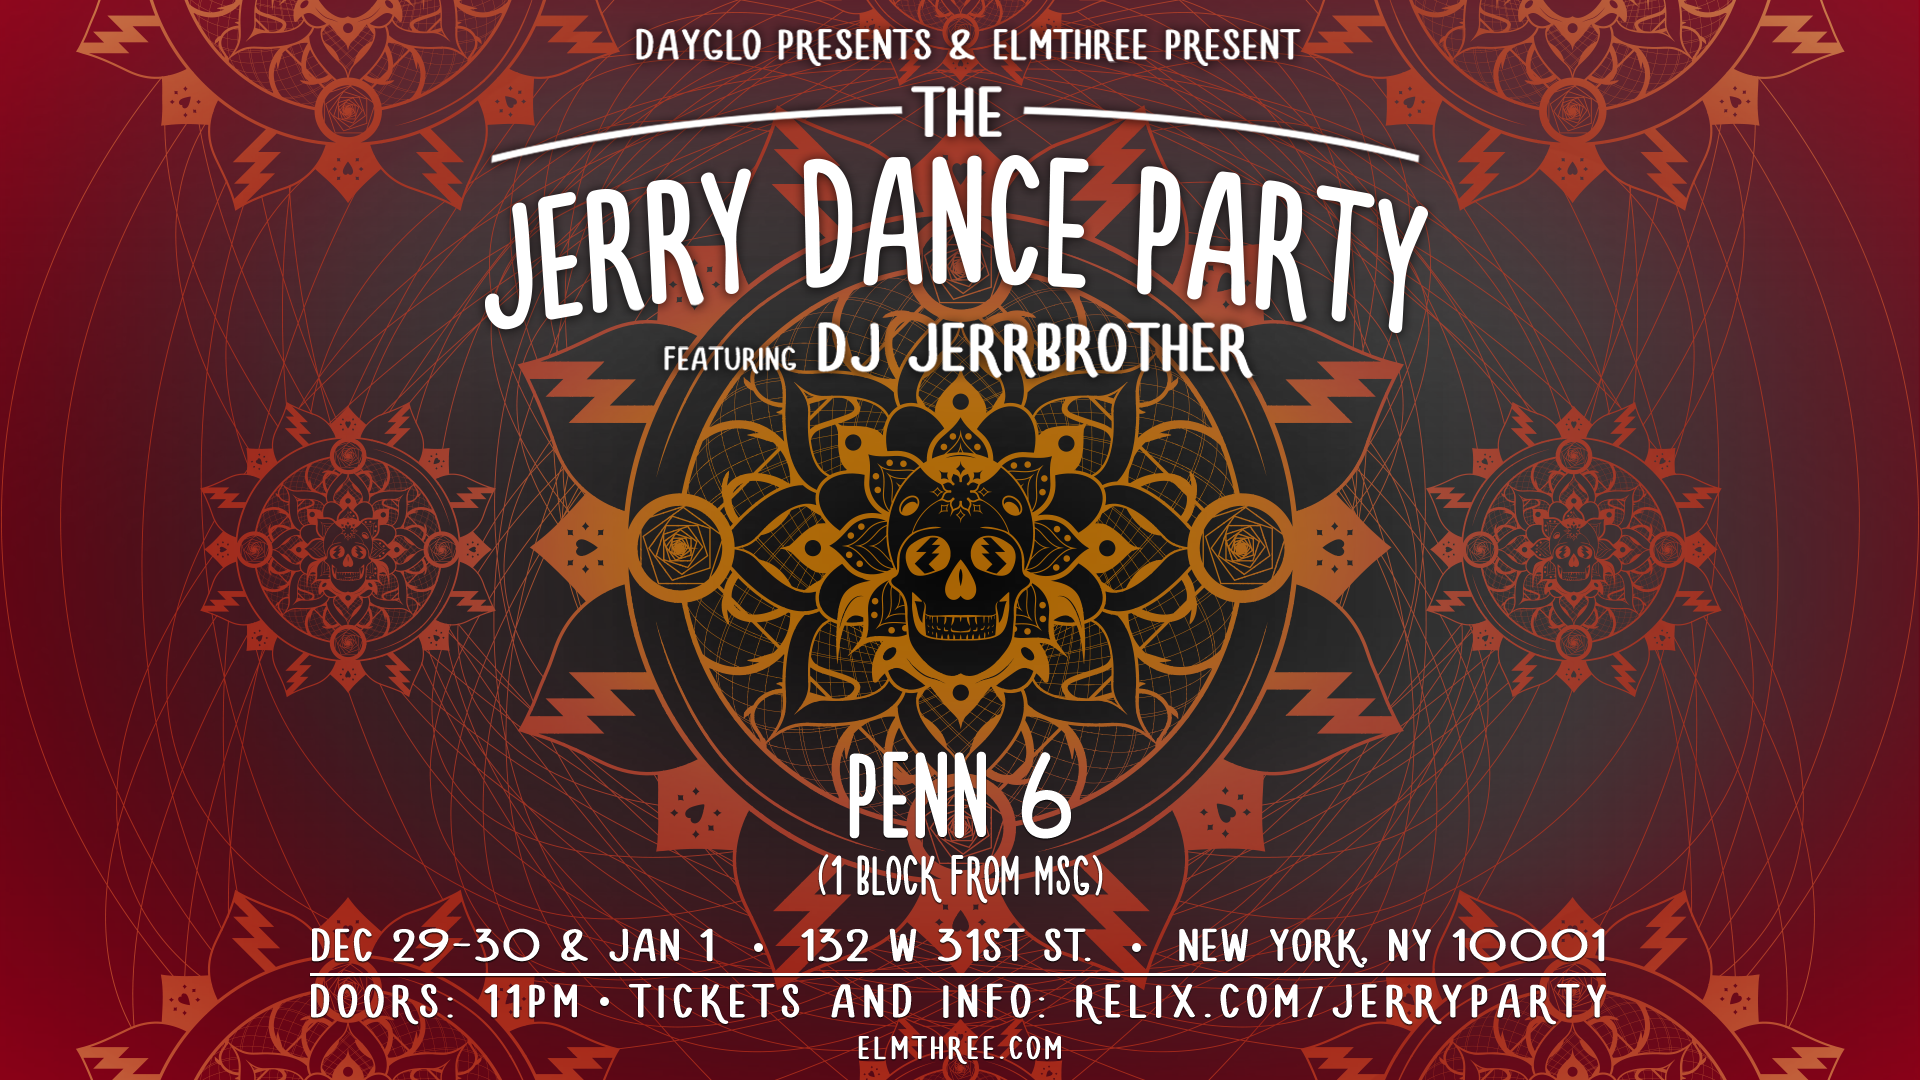 Dayglo Presents and ElmThree Announce Psychedelic Jerry Dance Party Following Phish in NYC